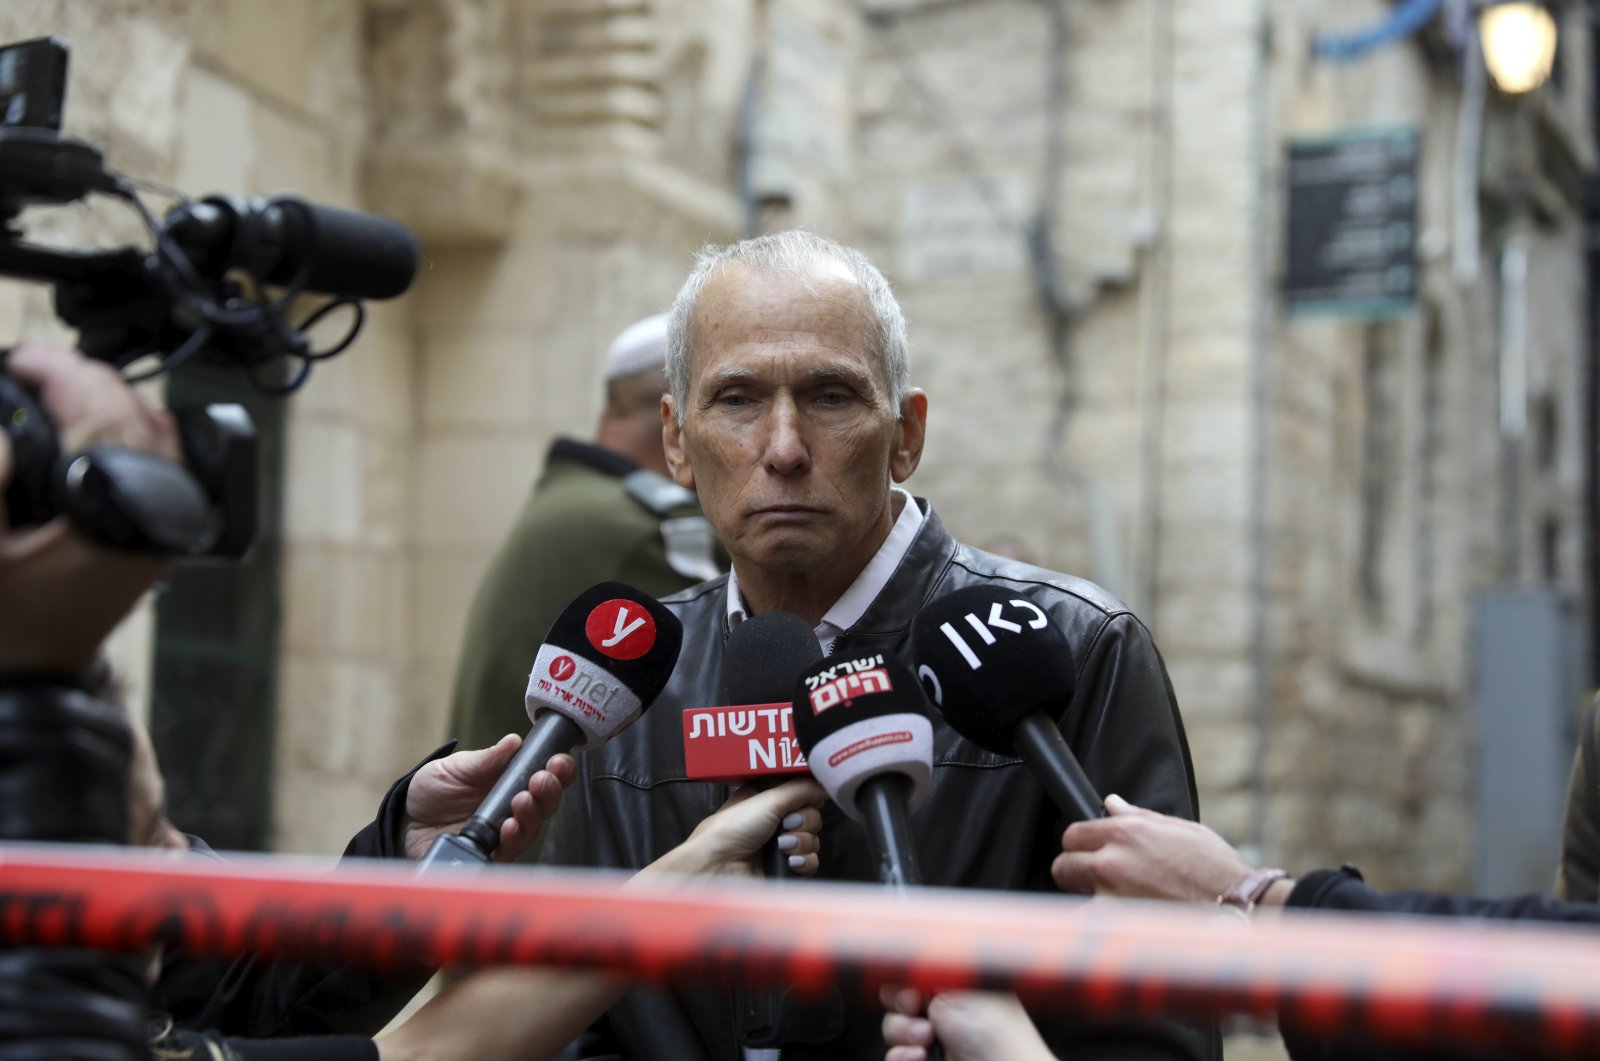 Israel&#039;s government minister for public security Omer Barlev speaks to the media at the scene of a Palestinian shooting attack in Jerusalem&#039;s Old City, occupied Palestine, Nov. 21, 2021. (AP Photo)